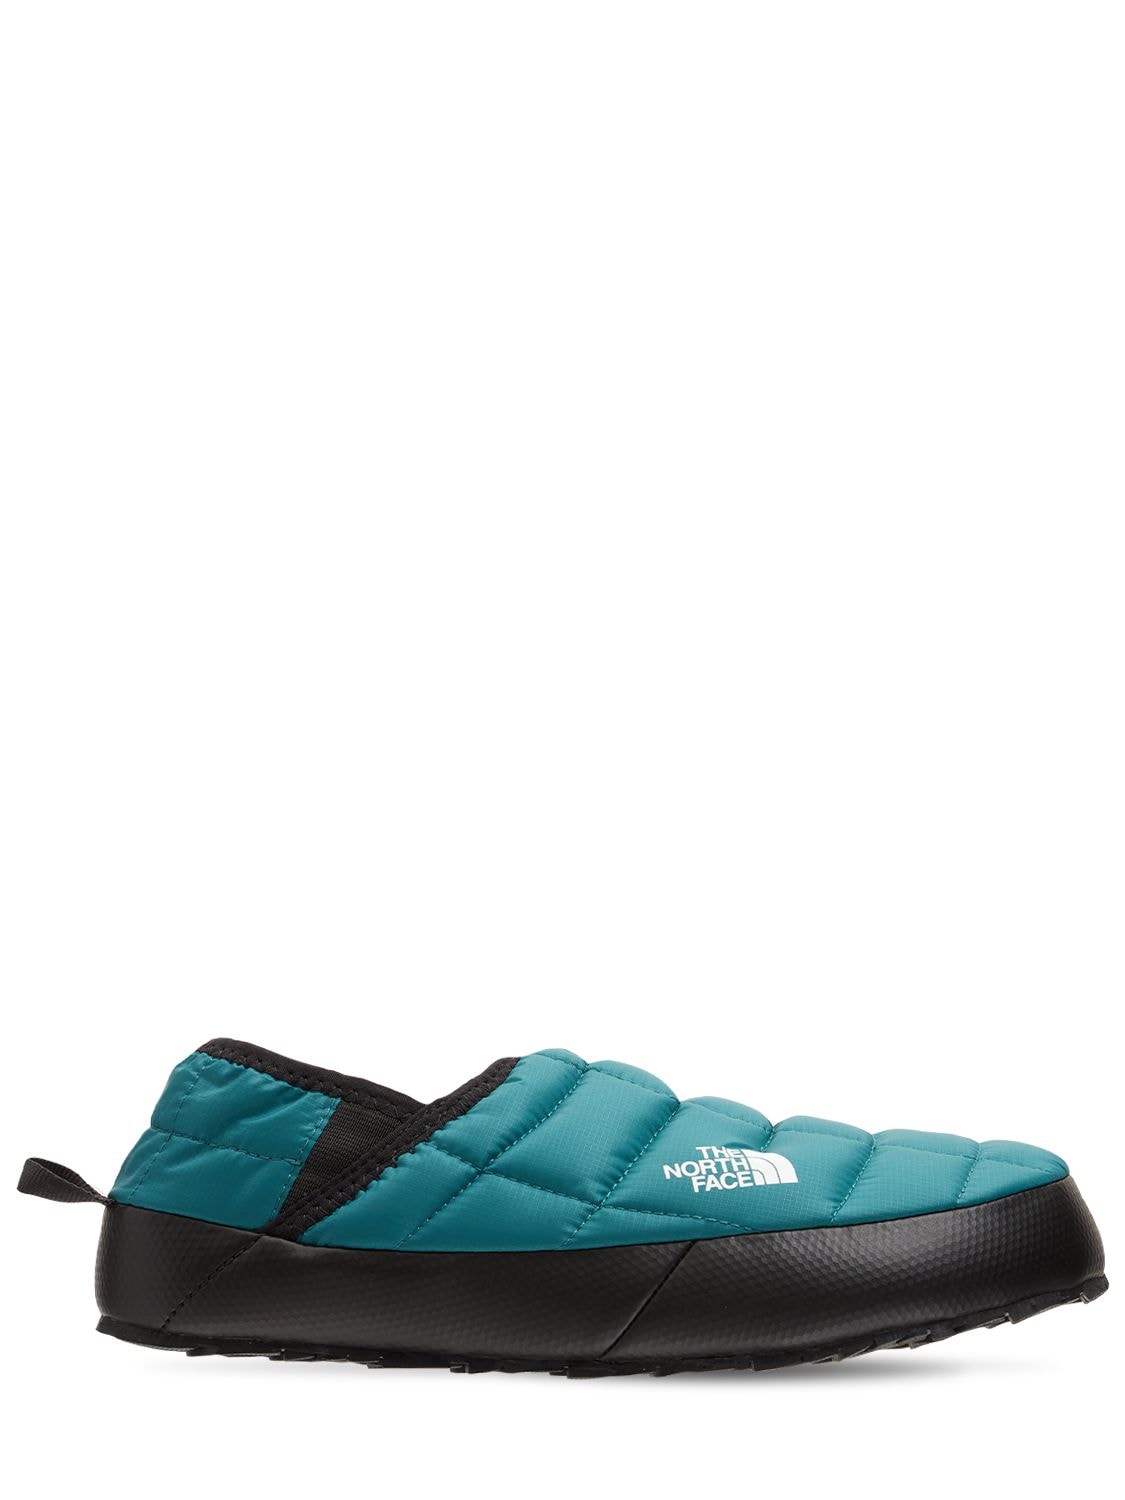 THE NORTH FACE THERMOBALL TRACTION MULES,74IDOM055-MVM00